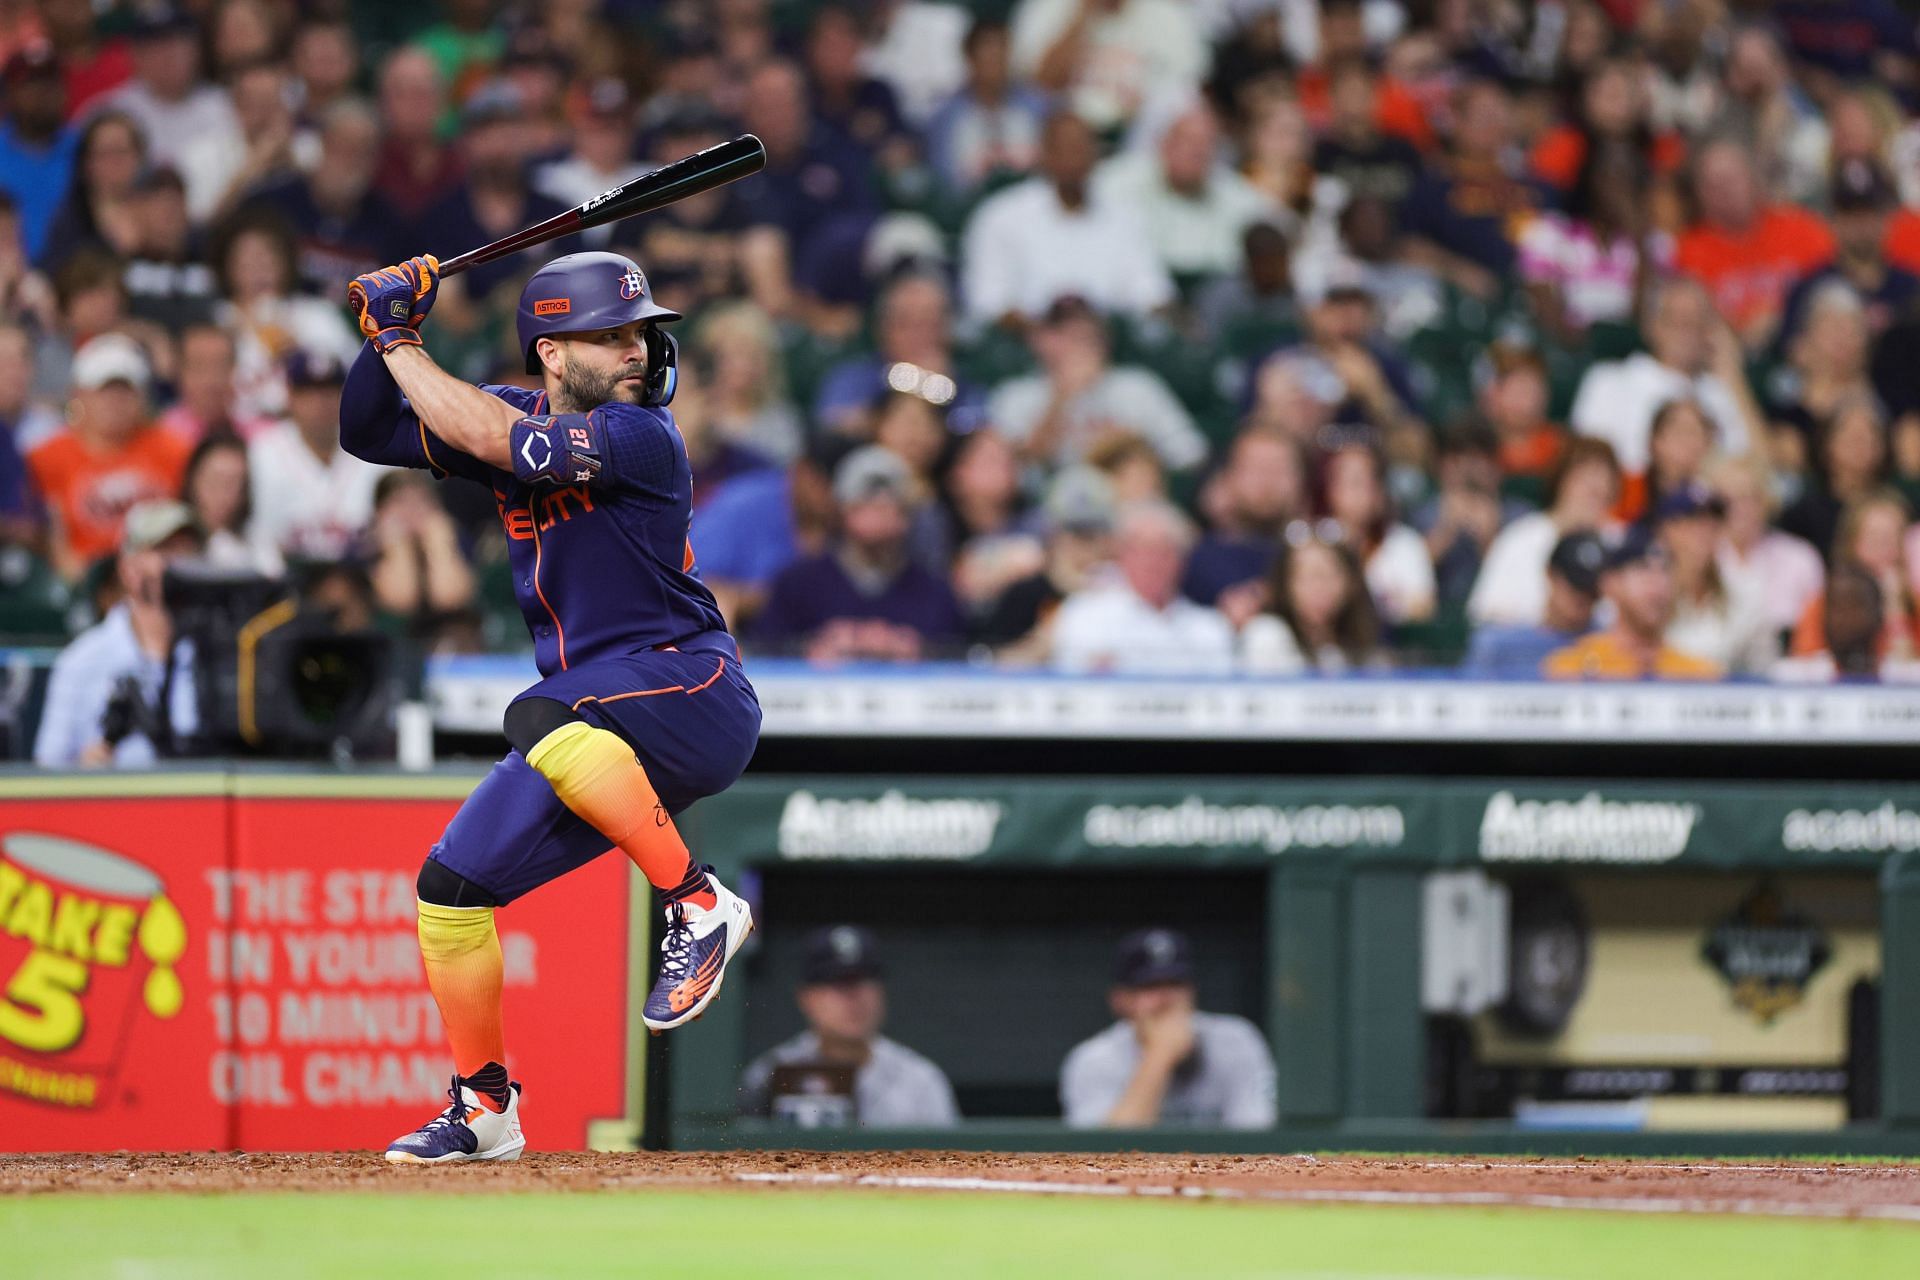 Altuve at the plate, Seattle Mariners v Houston Astros